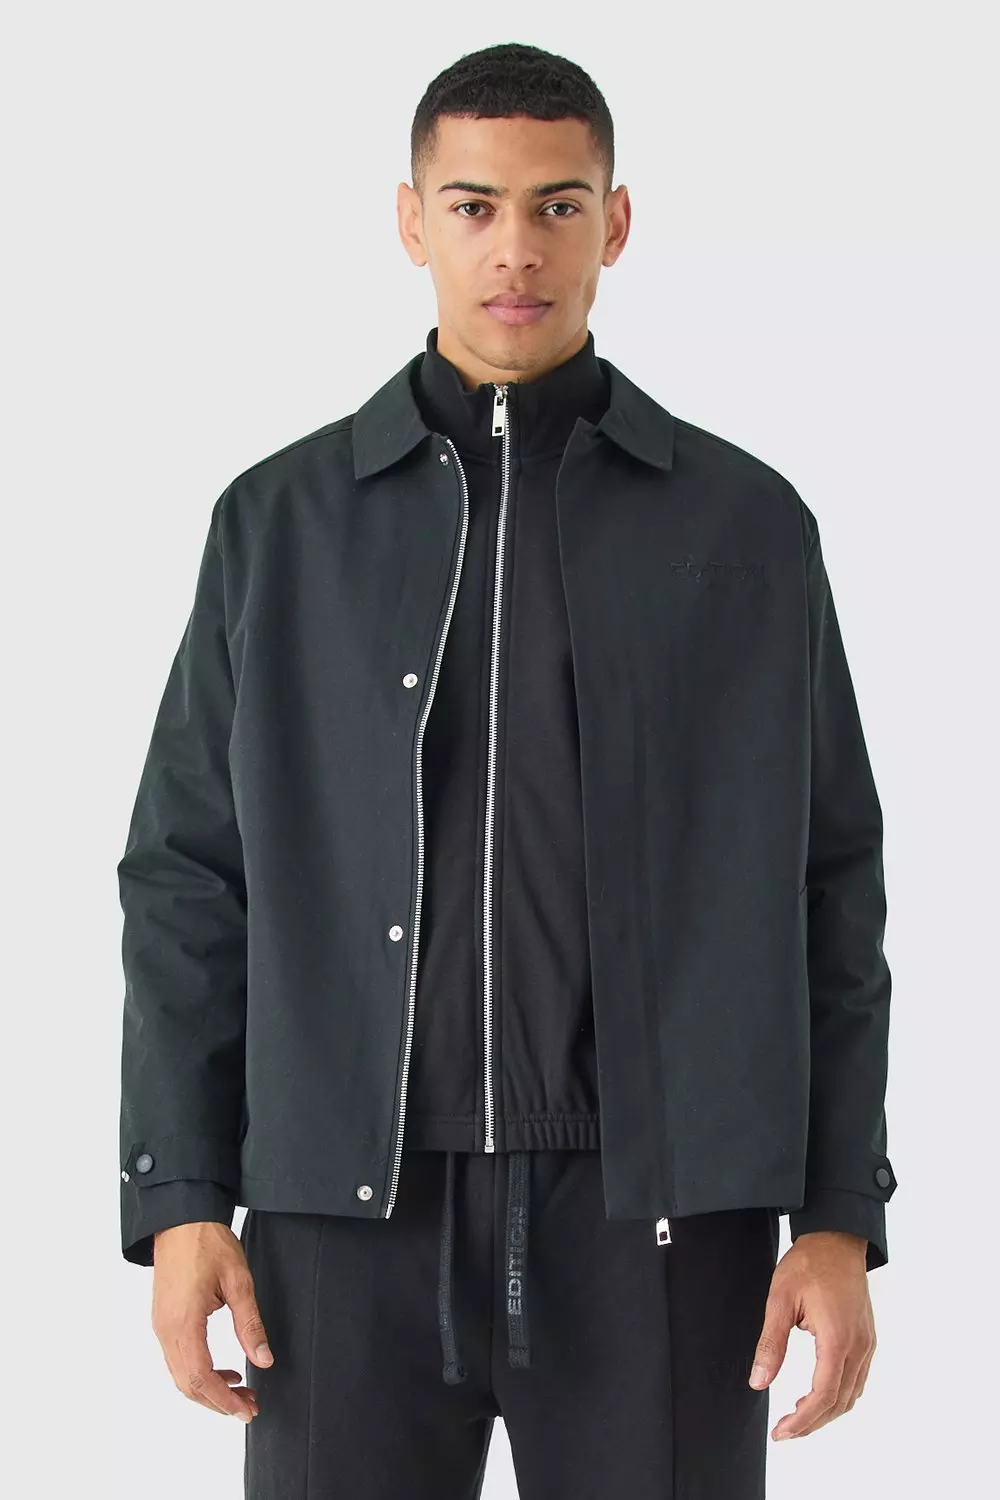 Heavyweight Twill Embroidered Coach Jacket Black